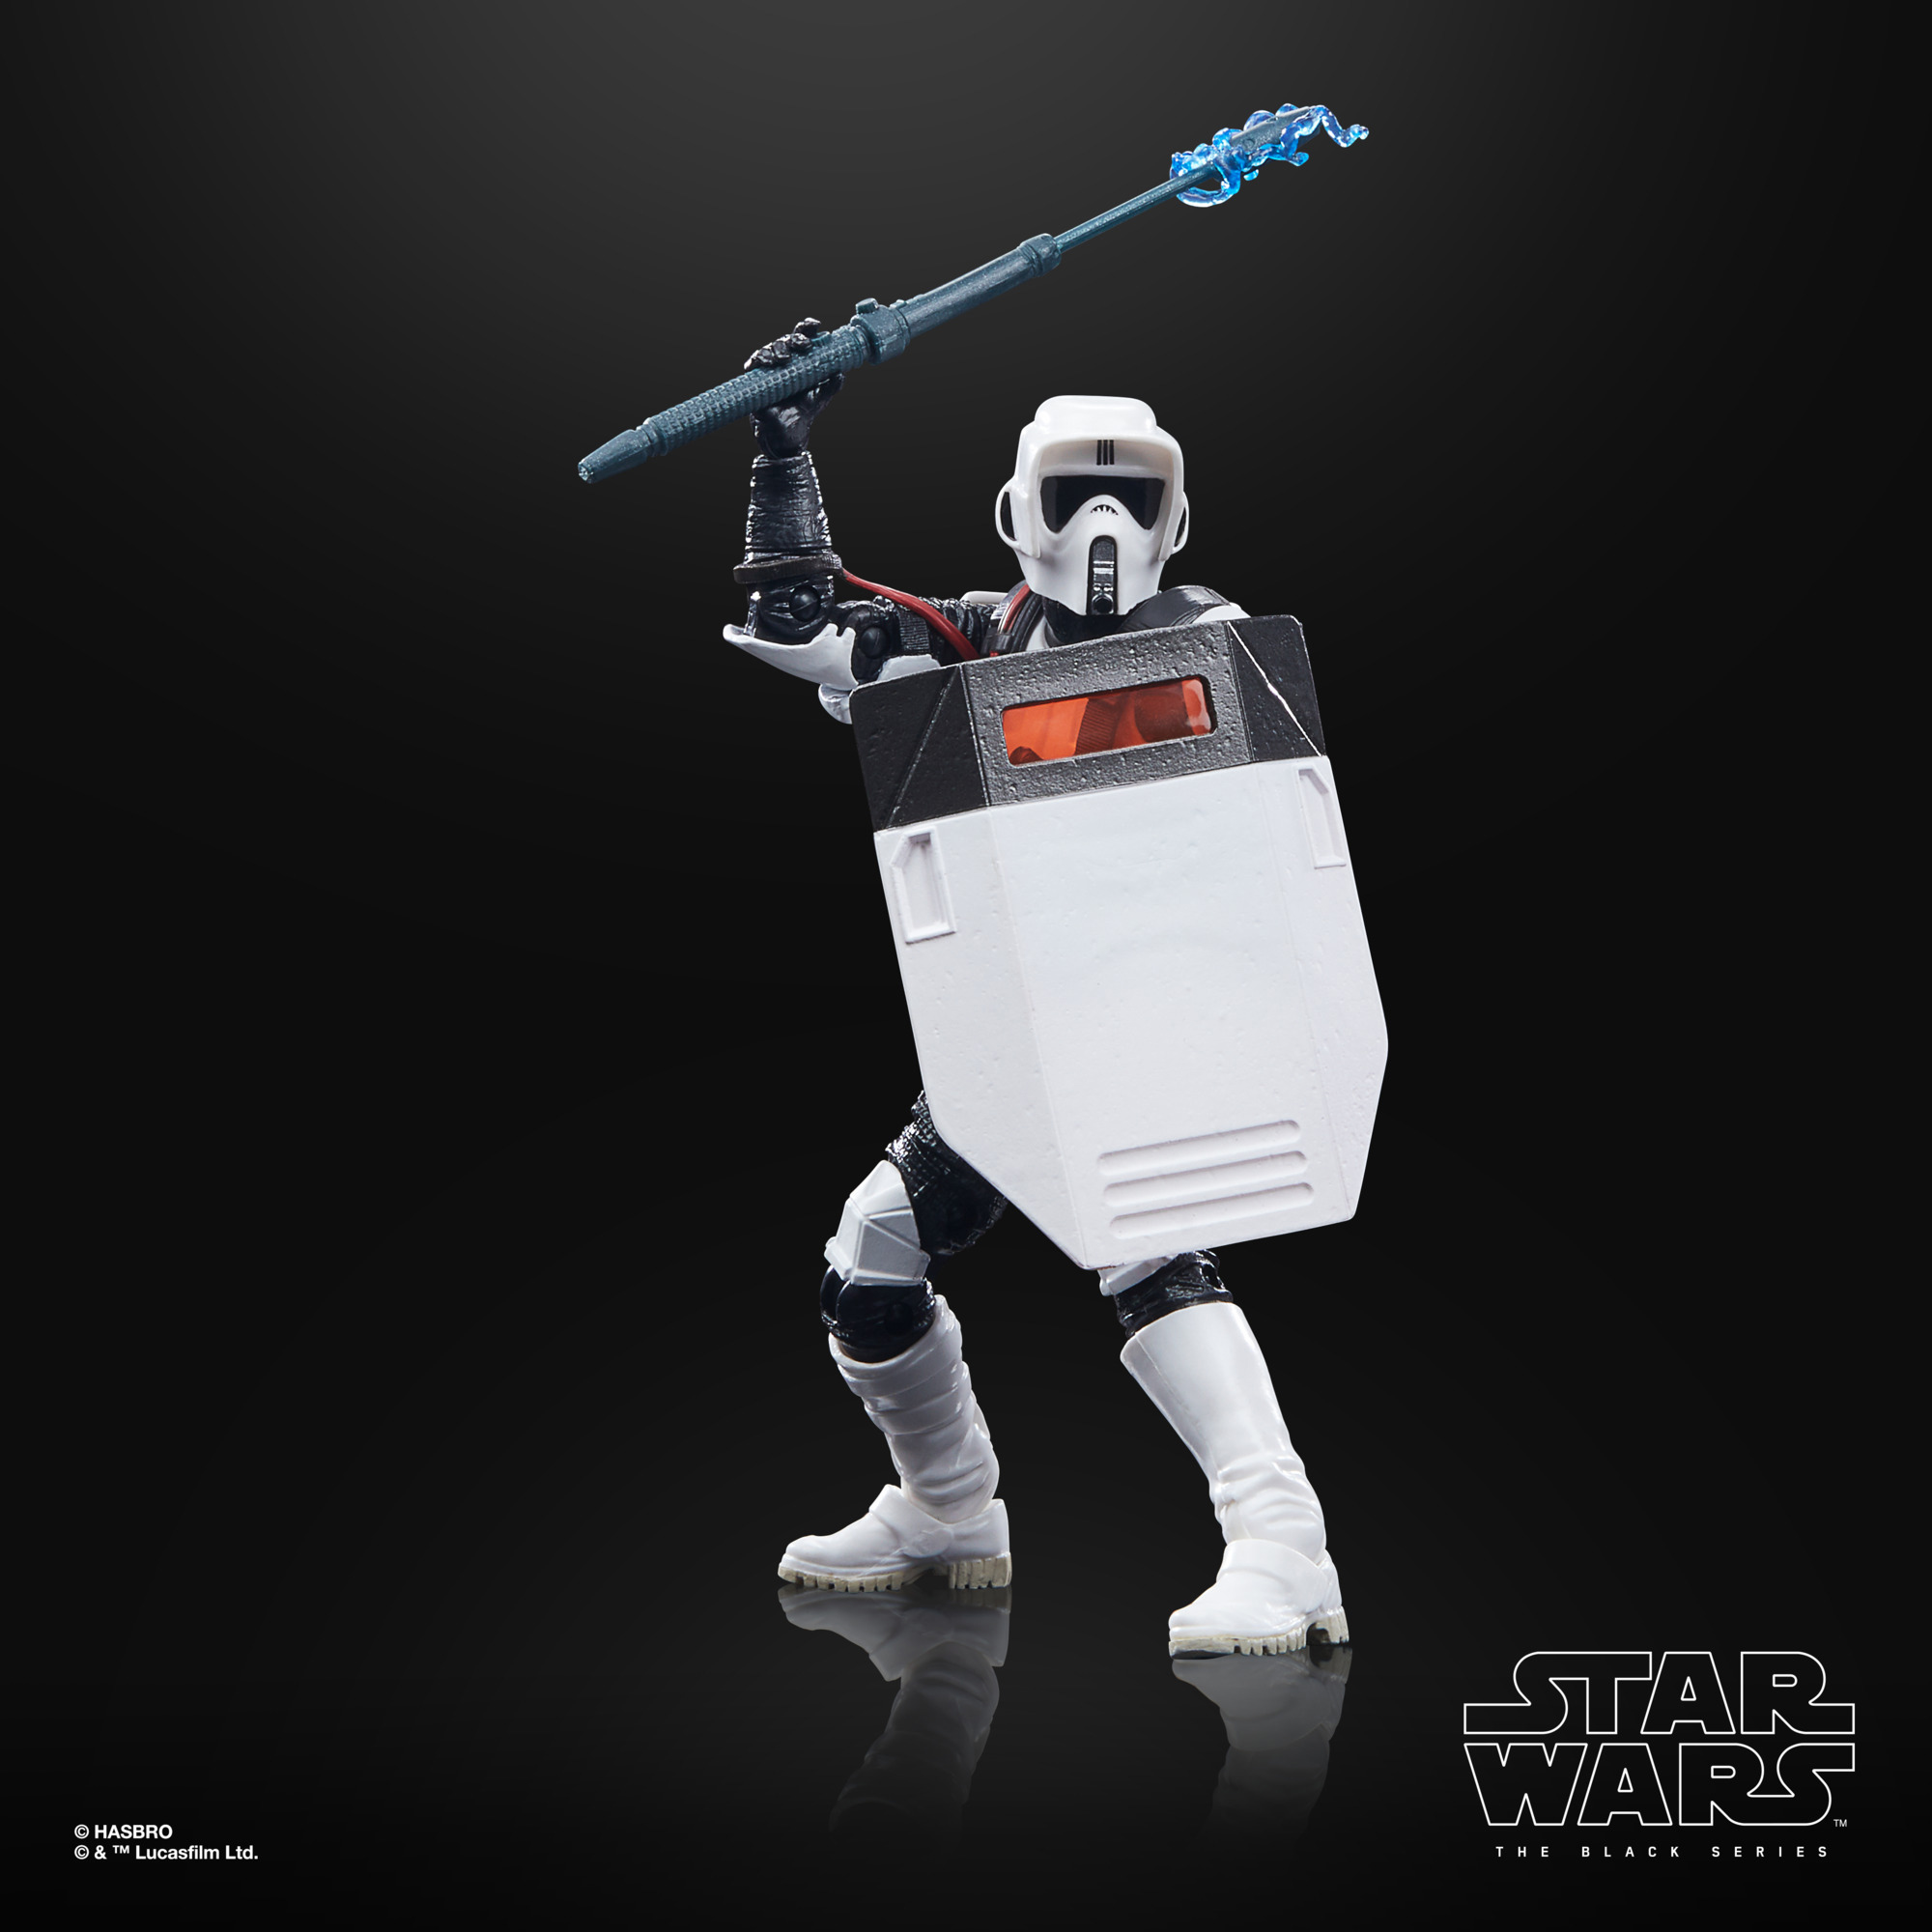 Press Release - Exclusive Obi-Wan and Darth Vader (Concept Art Edition) And Game Stop Riot Scout Trooper Figure